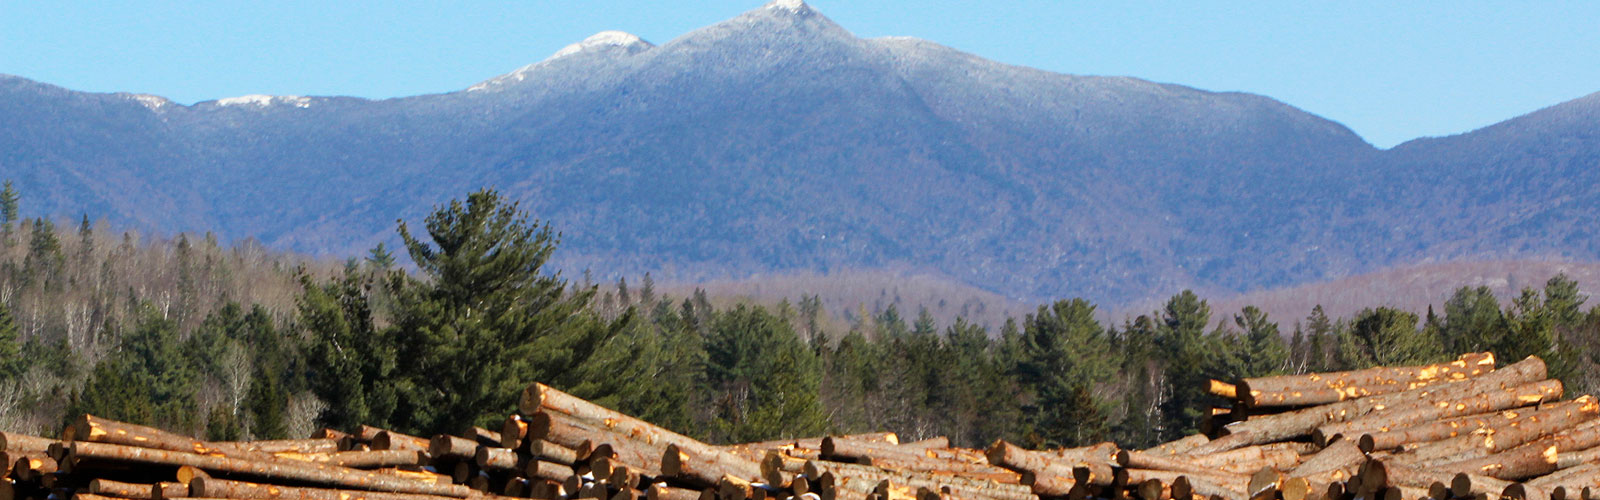 timber stack at the base of mount mansfield in vermont